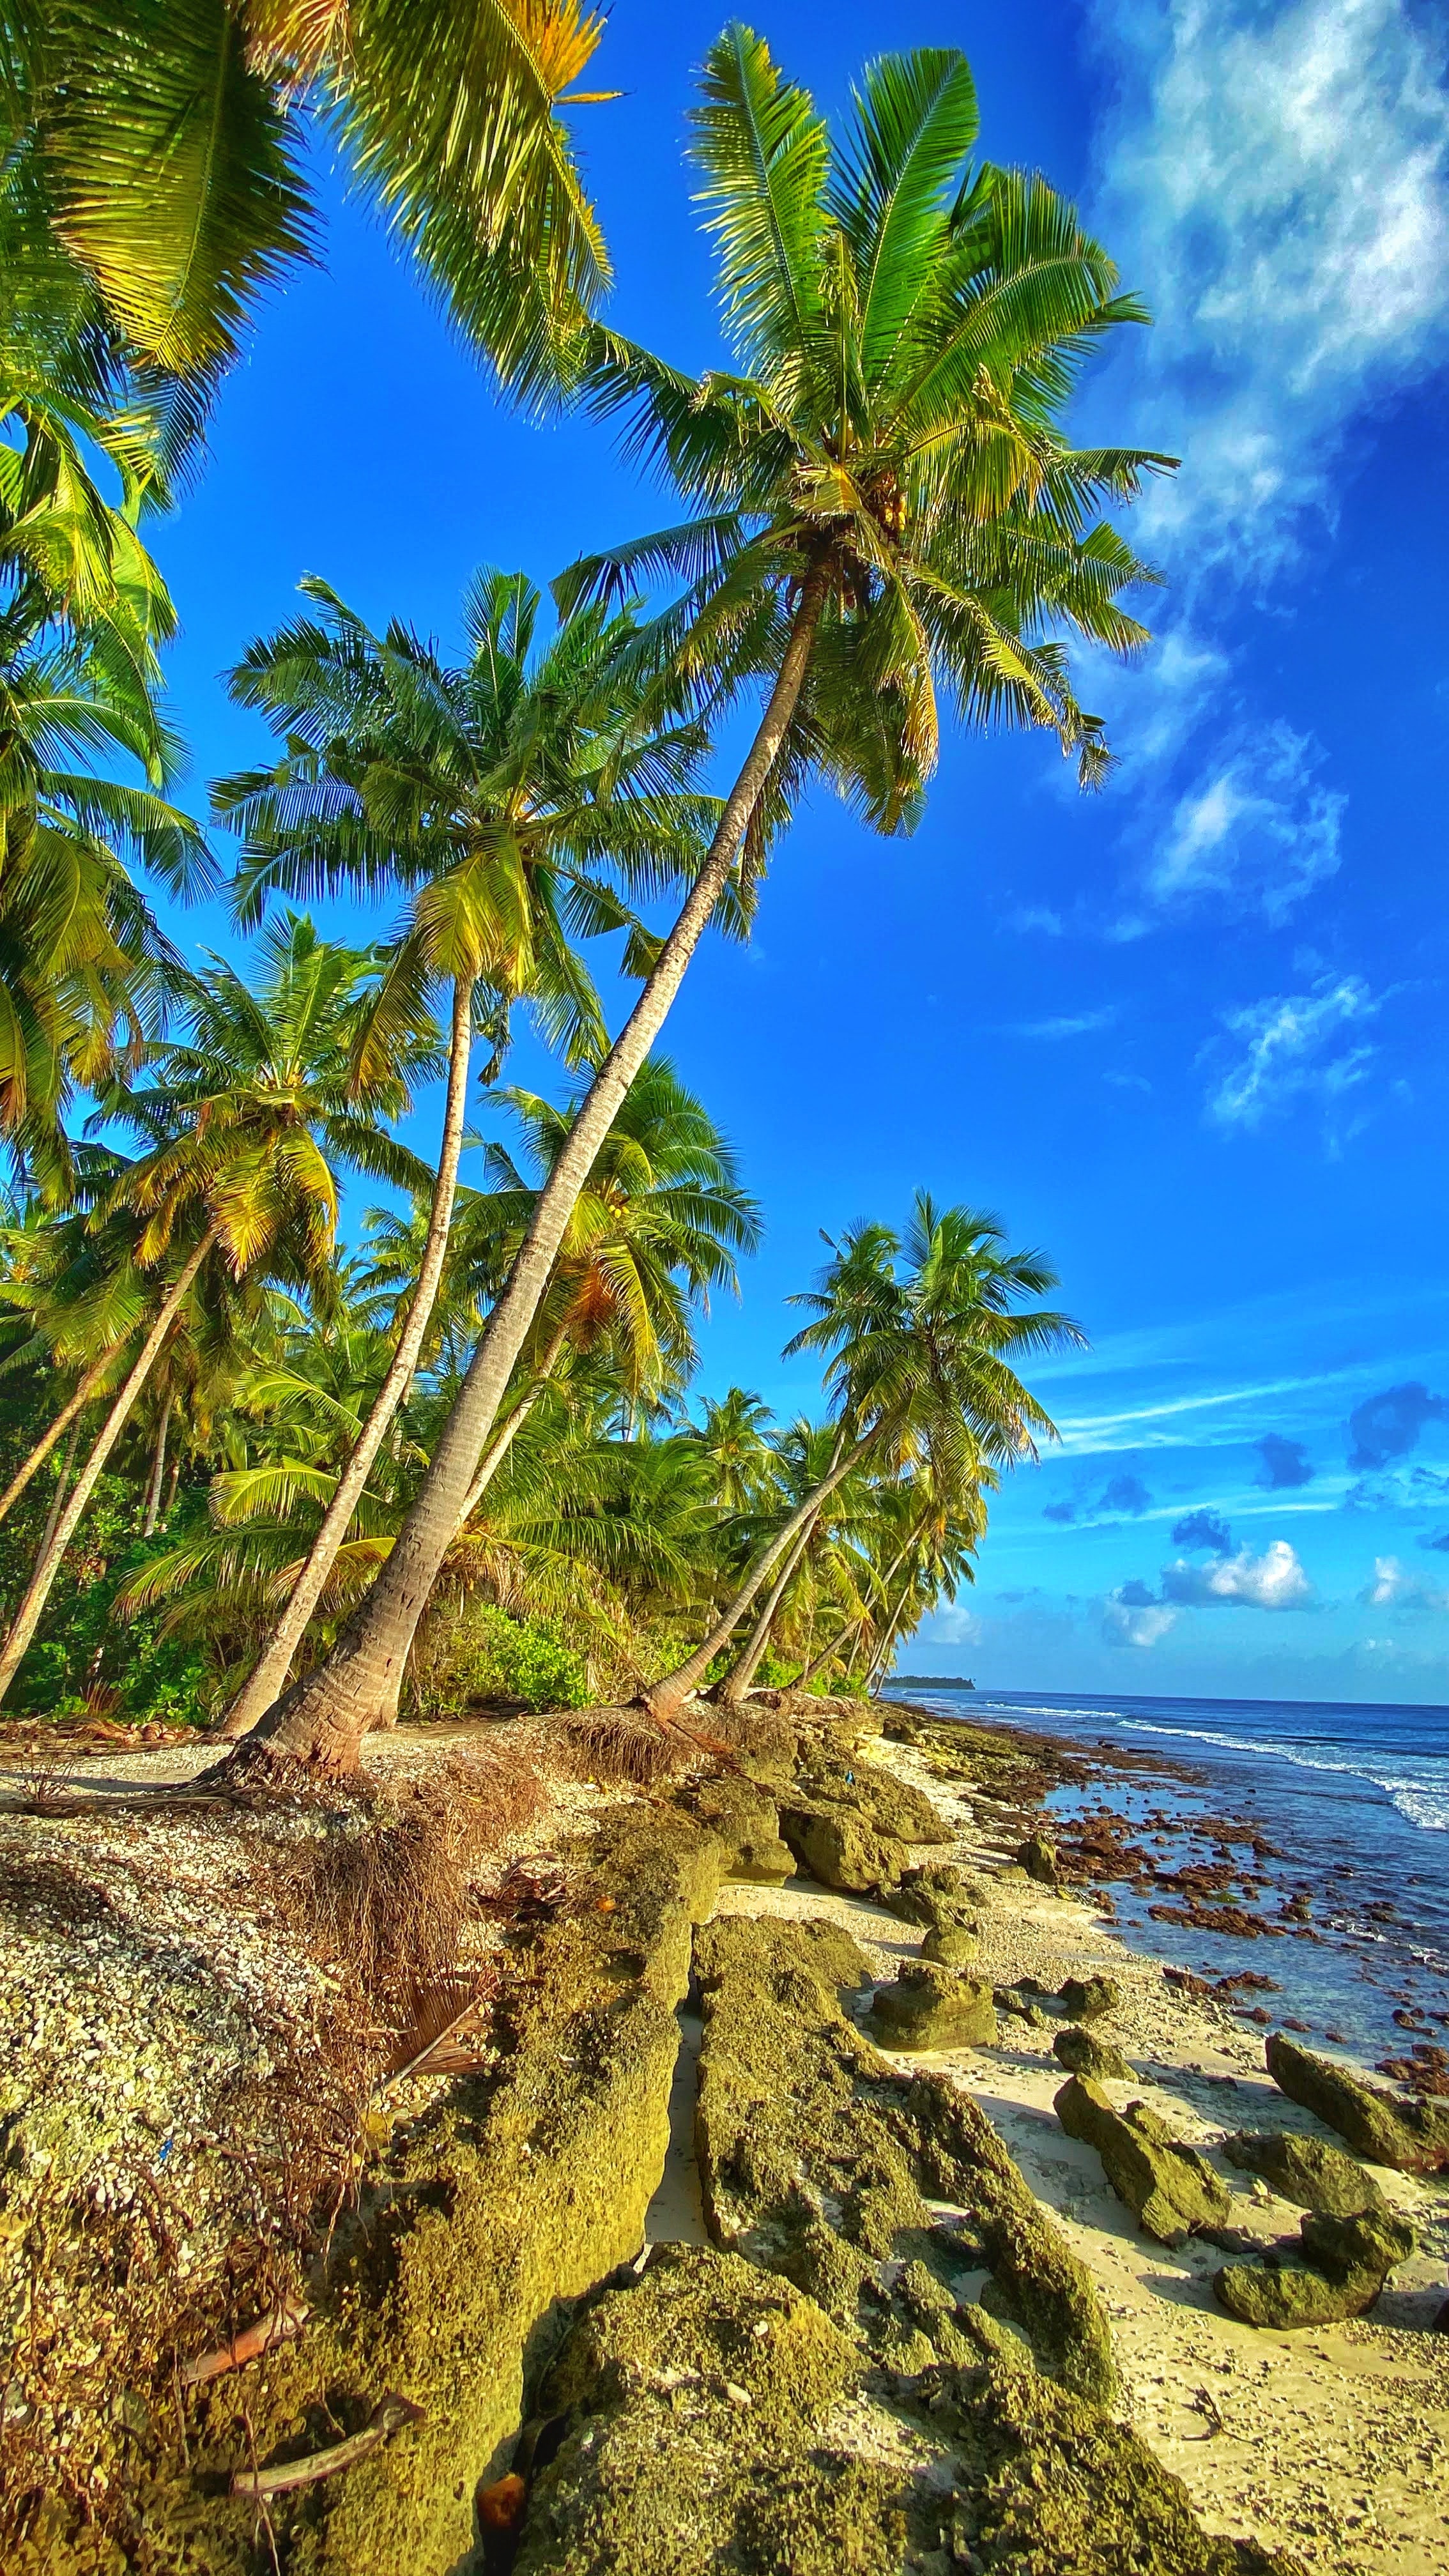 153738 download wallpaper coast, nature, sky, sea, palms screensavers and pictures for free